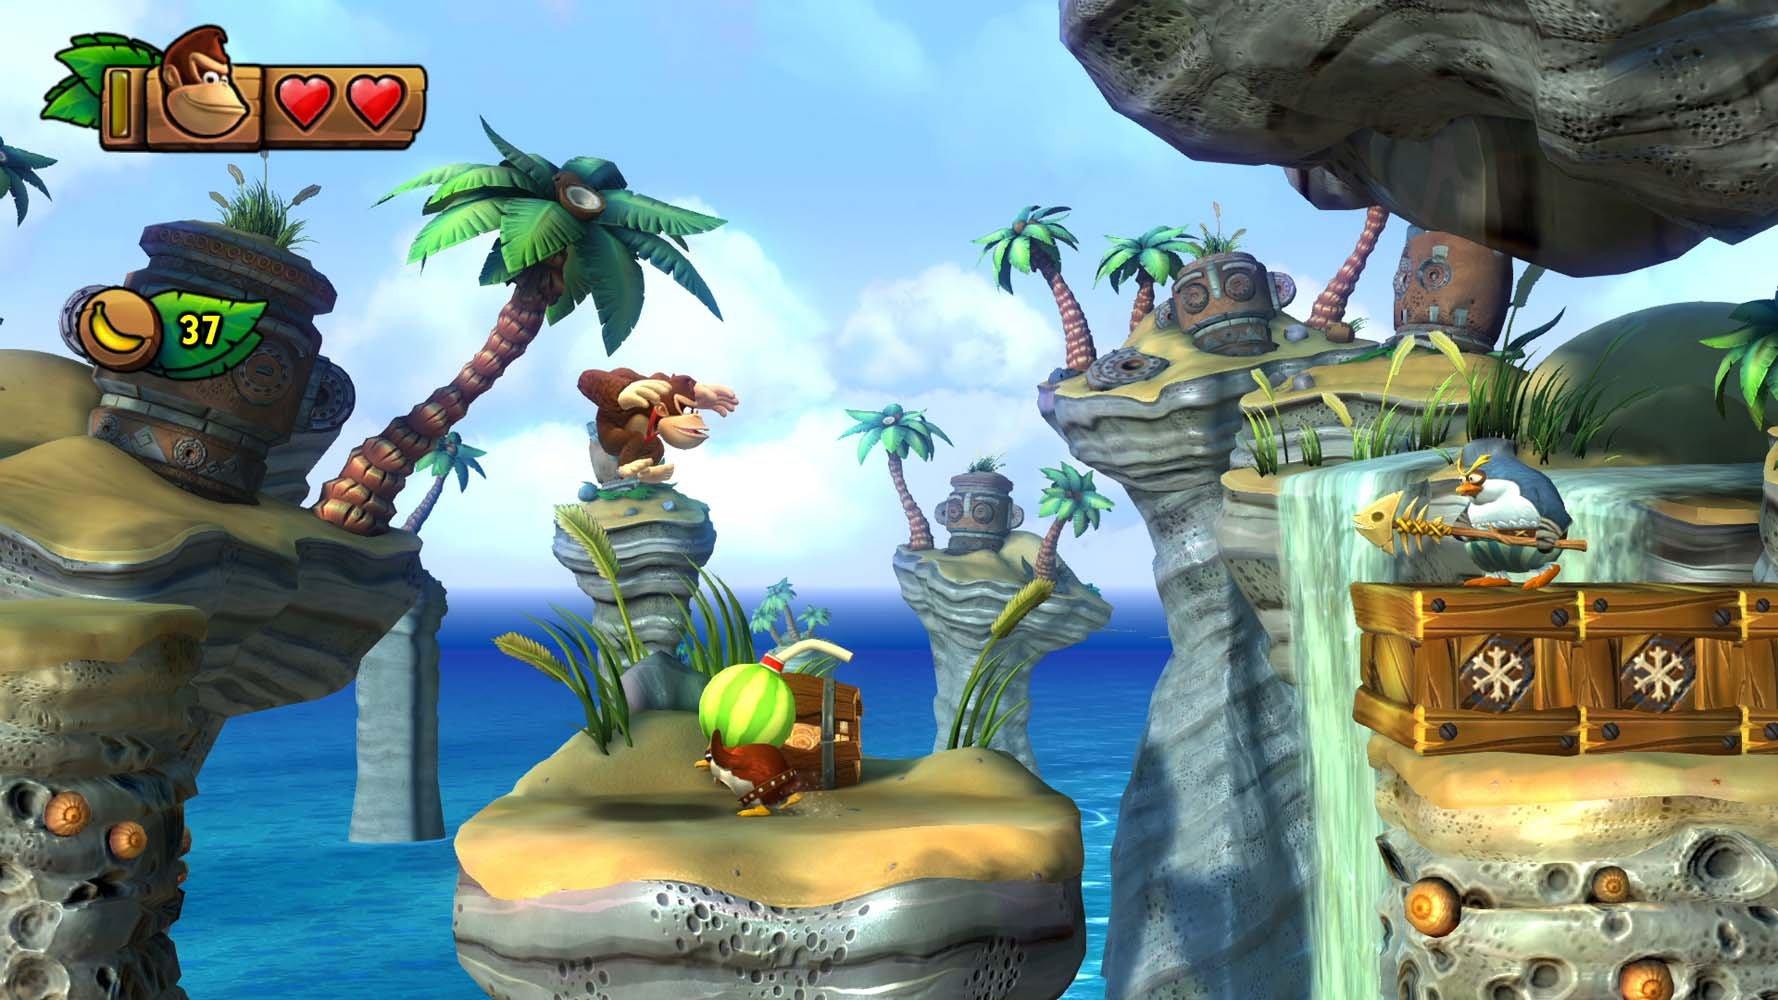 donkey kong country tropical freeze buy